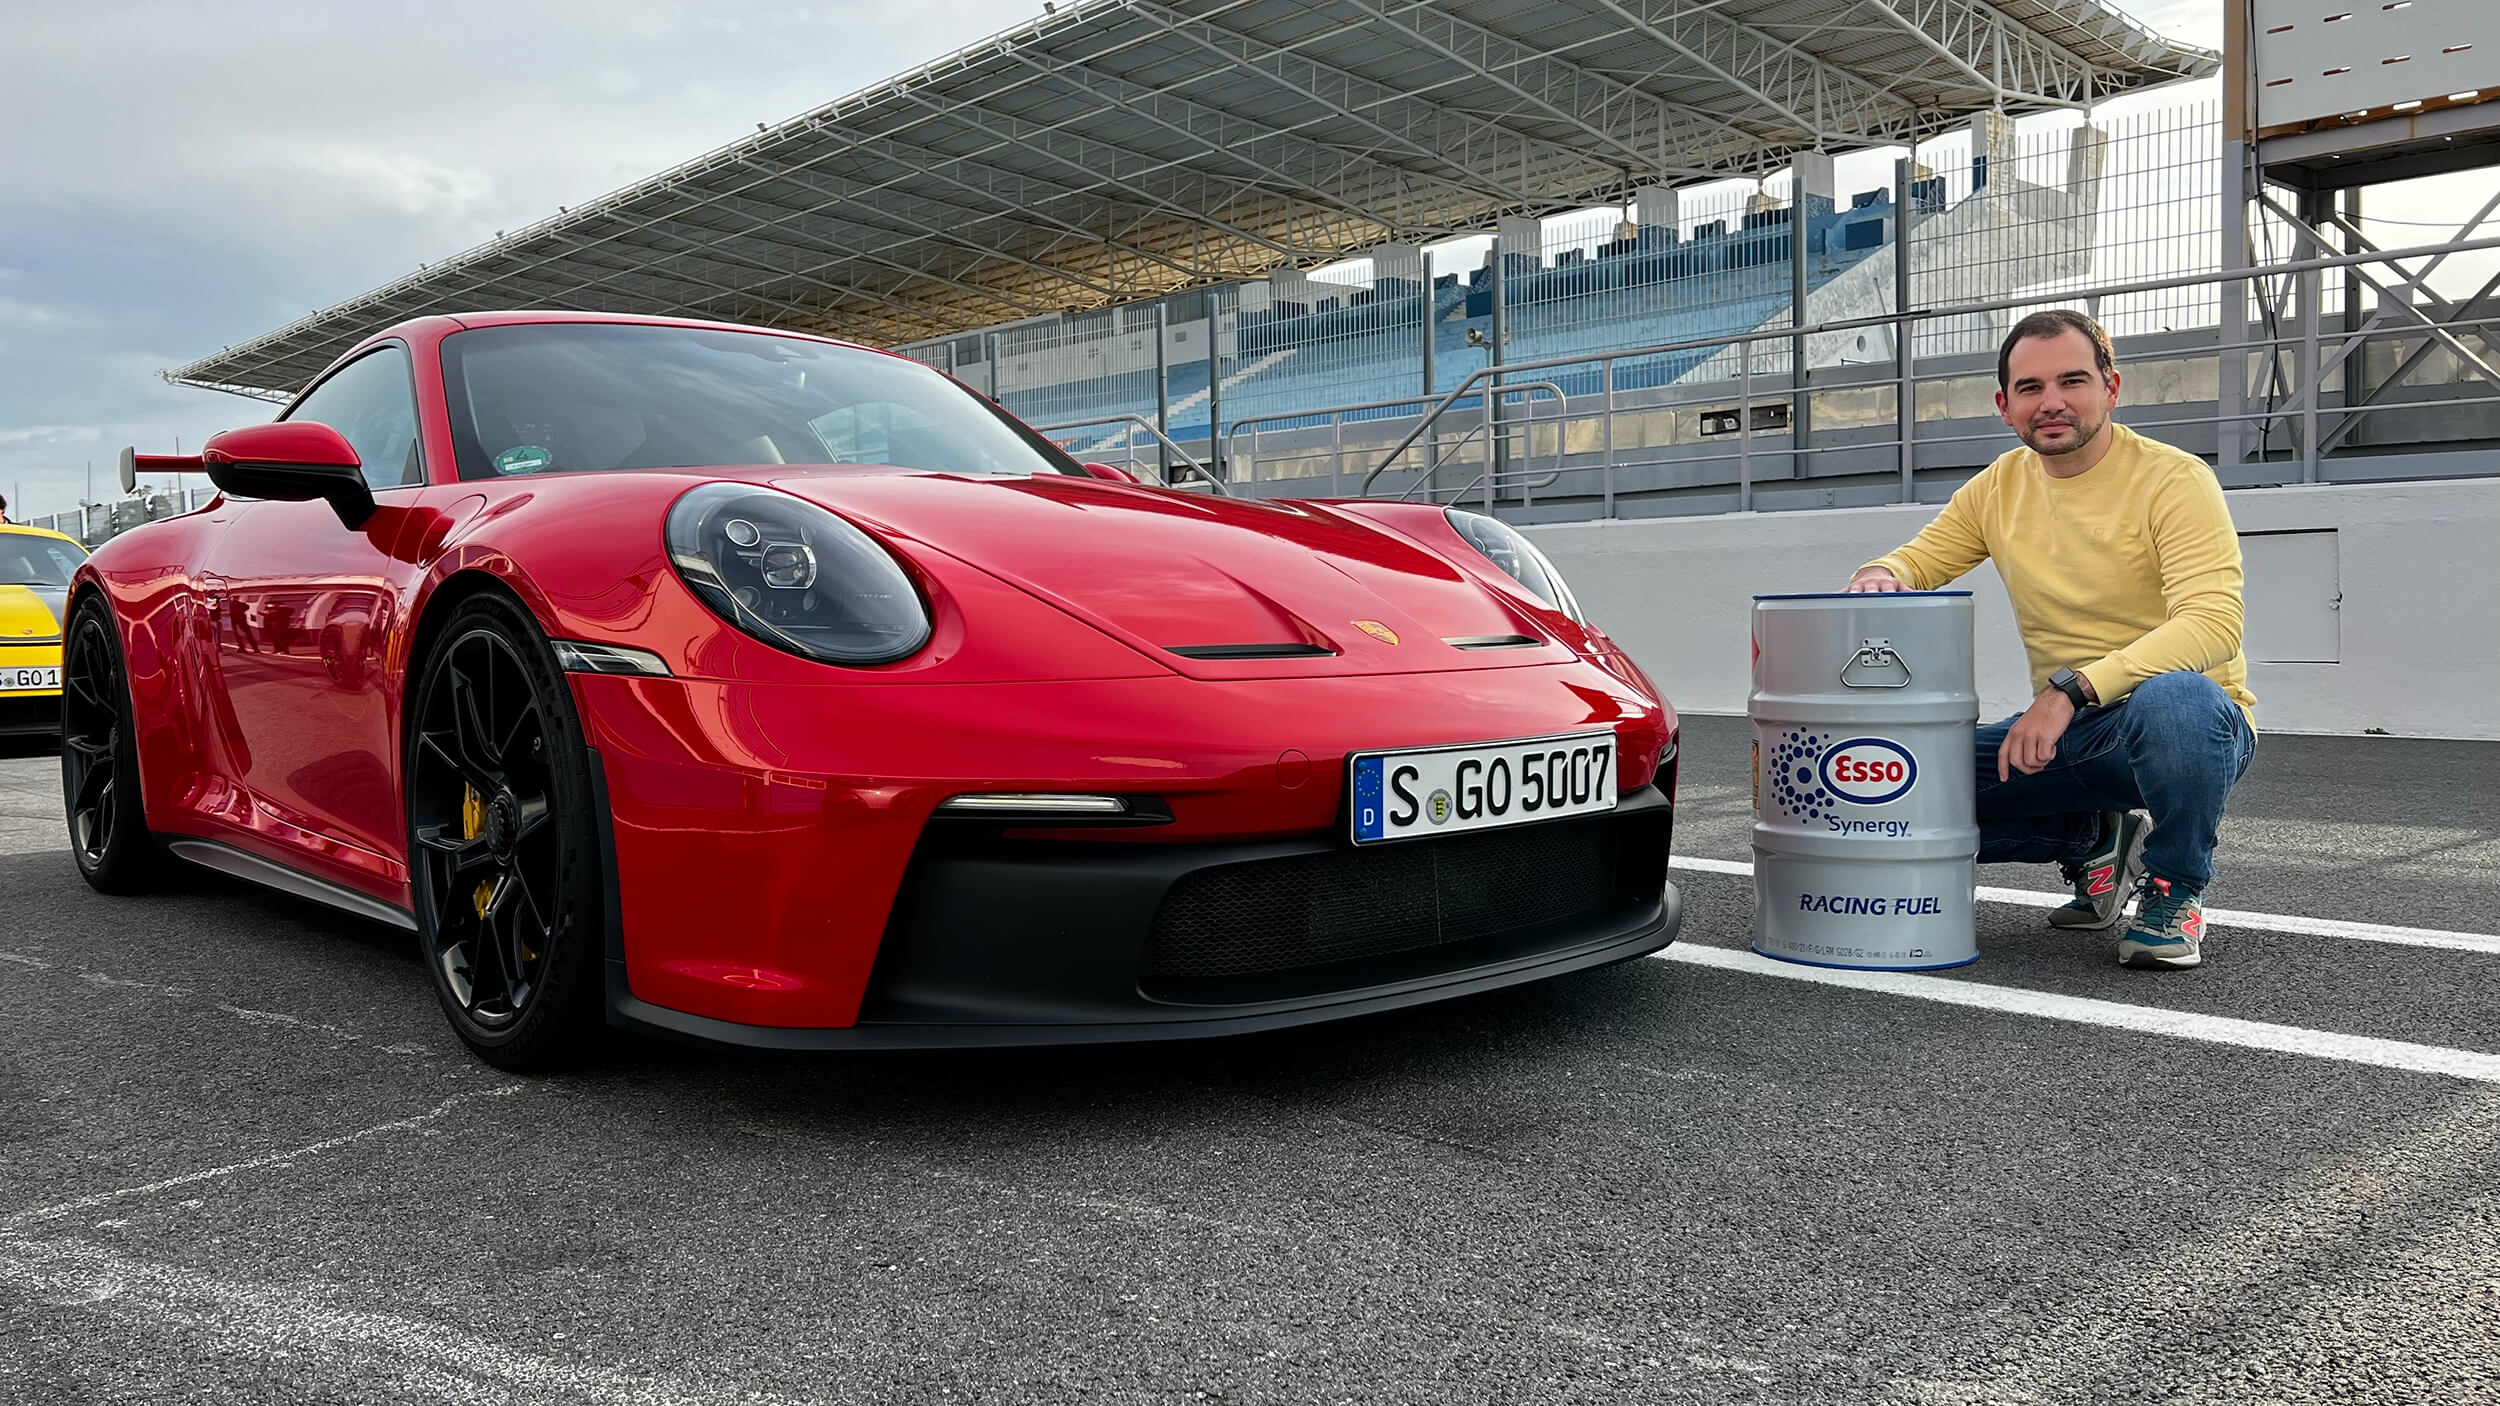 Porsche 911 GT3, Guilherme Costa and synthetic fuels